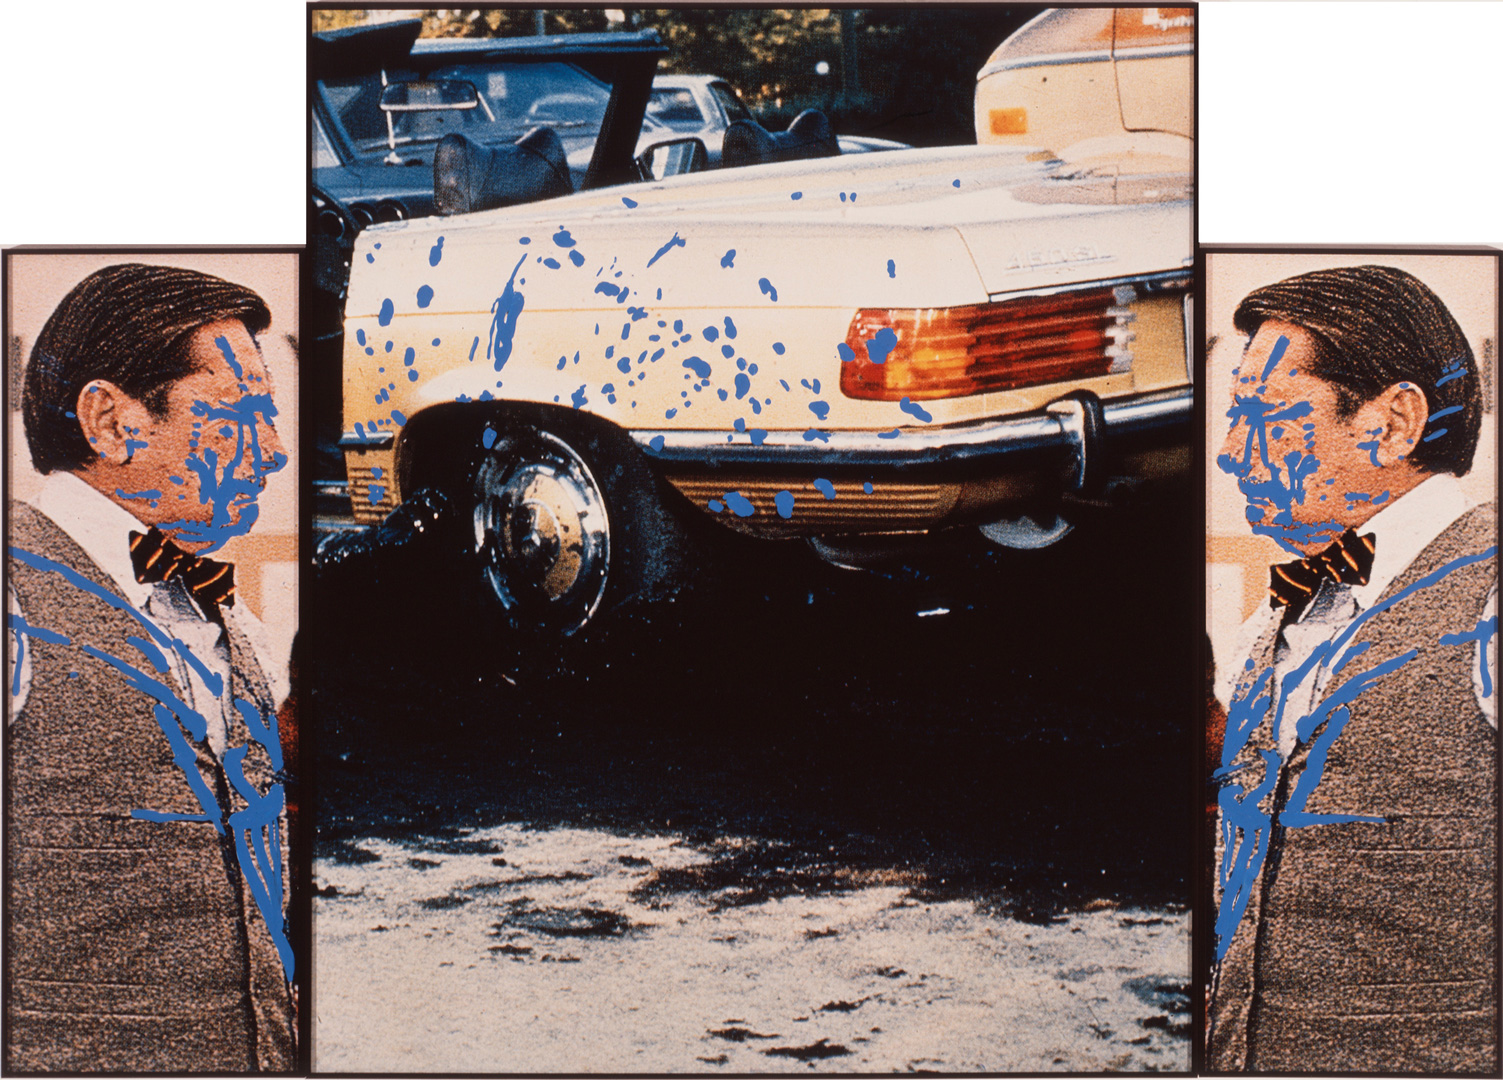 John Baldessari - Car Flanked by Doubleman (Splashed Blue), 1990, three color photographs with vinyl paint and acrylic paint